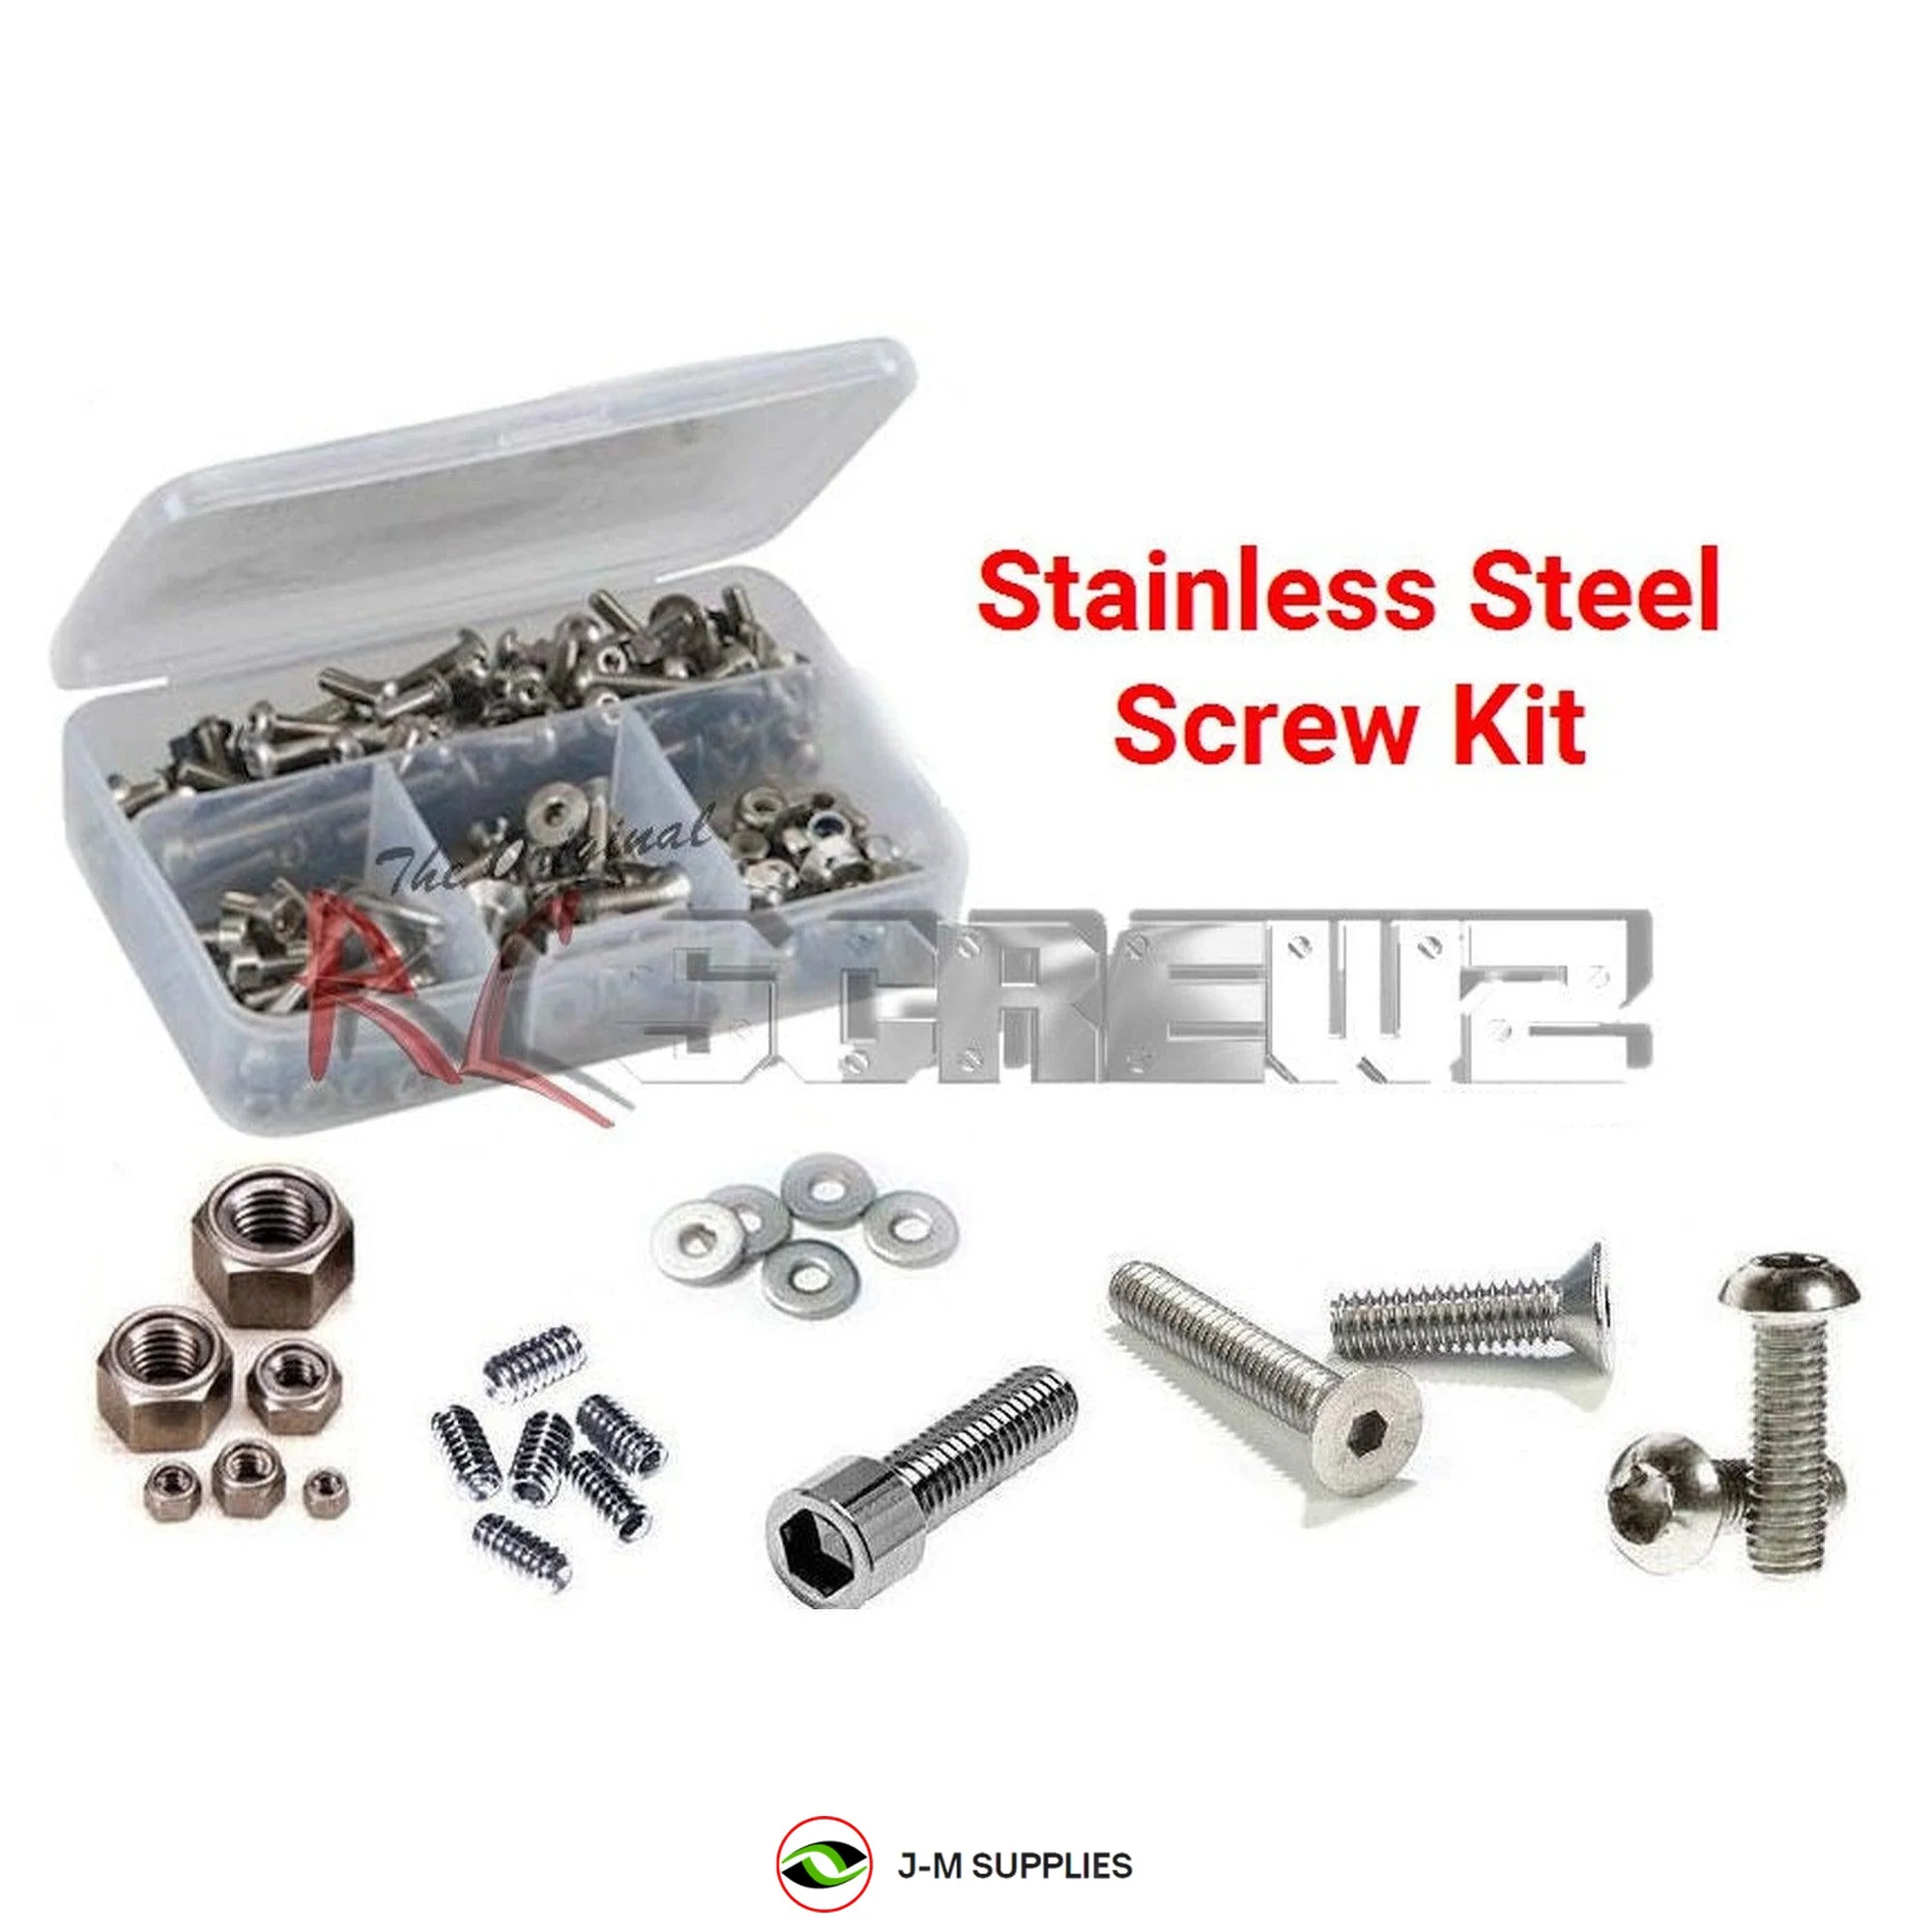 RCScrewZ Stainless Steel Screw Kit tam095 for Tamiya Mammoth Dump Truck #58268 - Picture 1 of 12